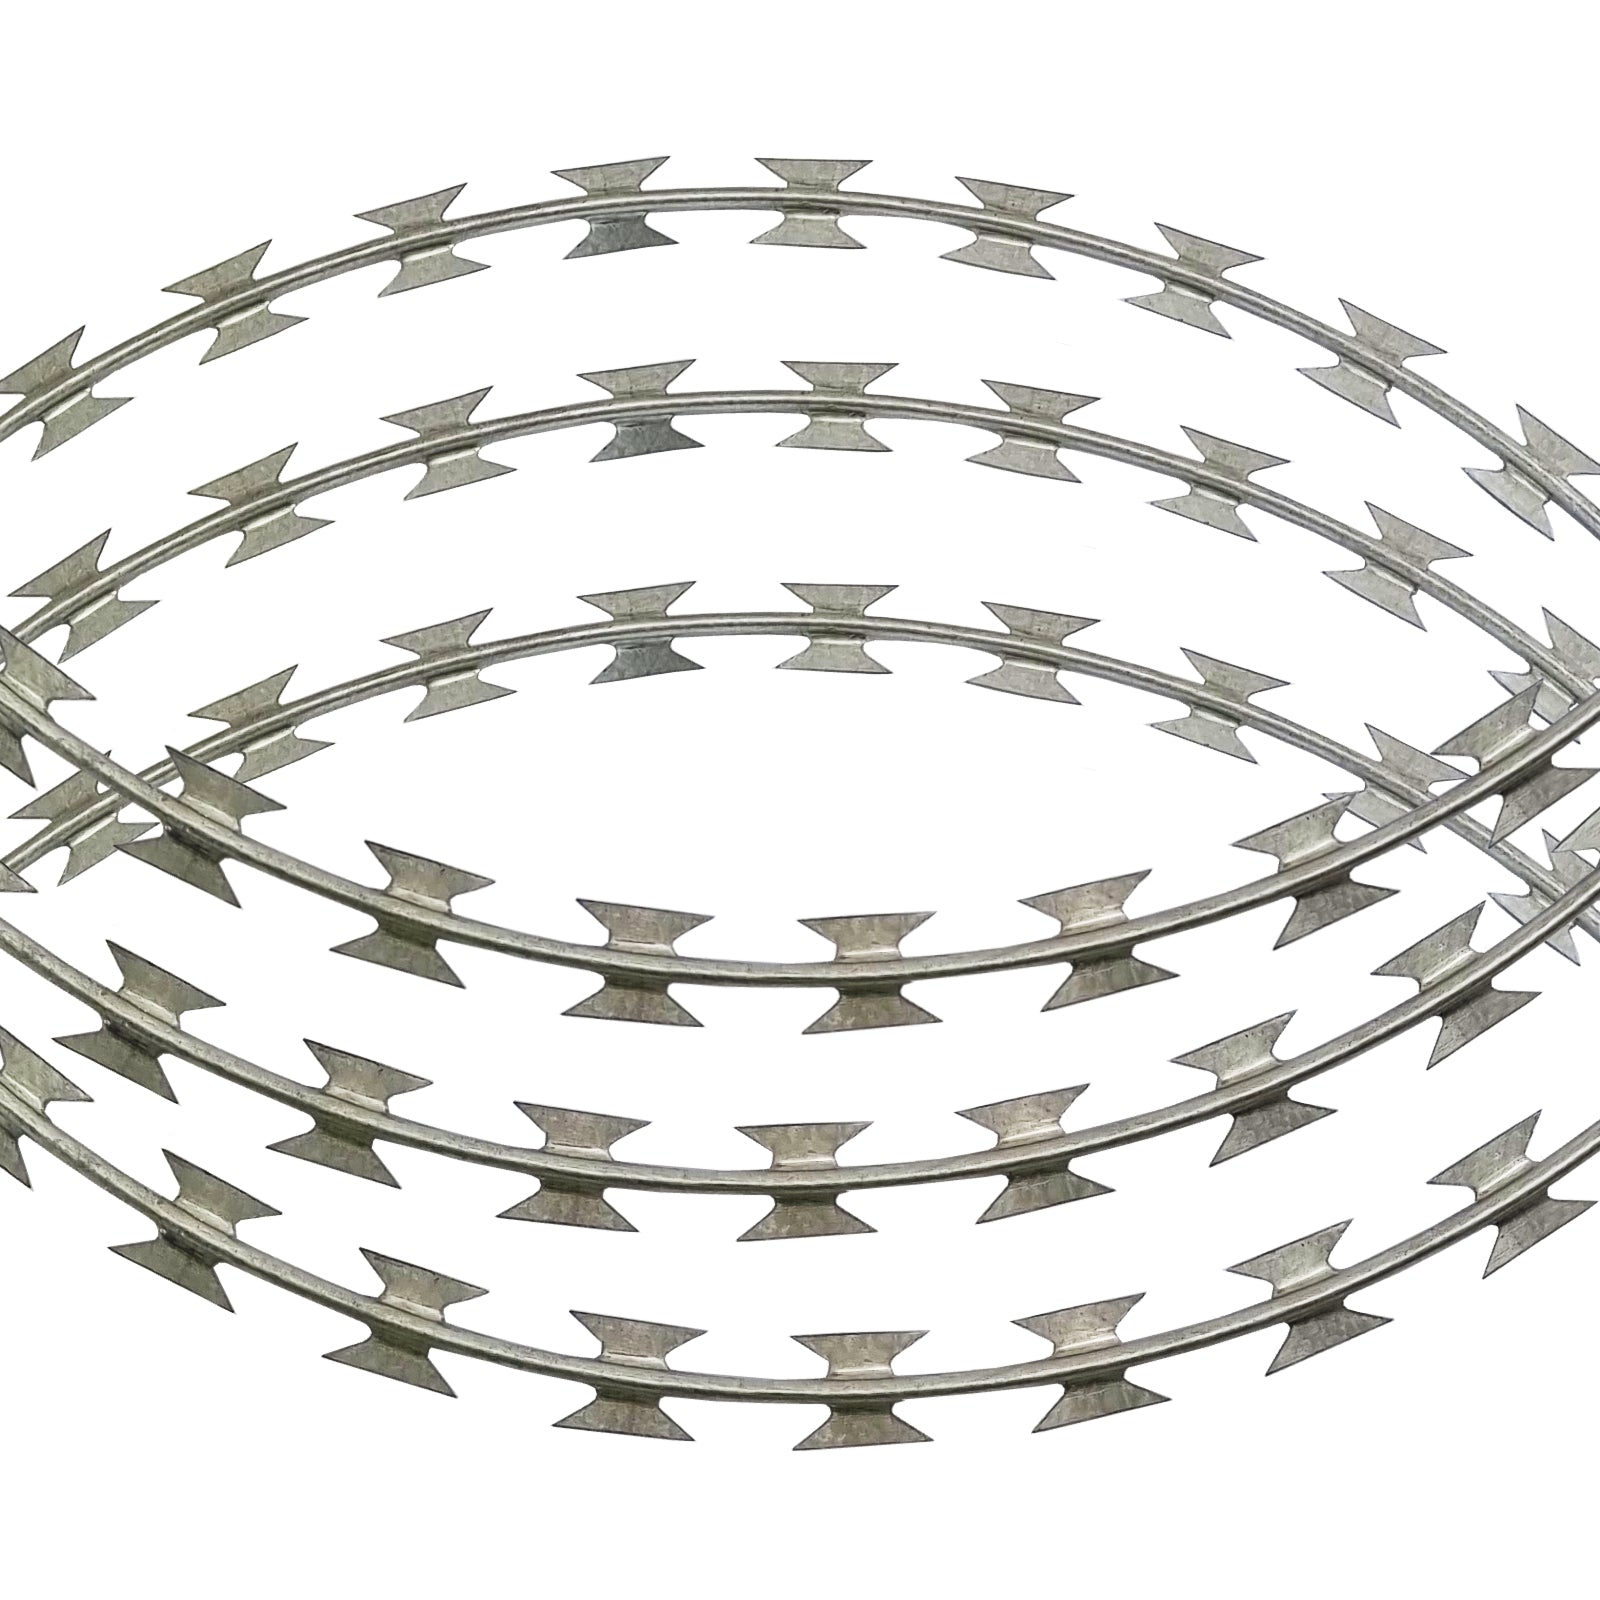 Galvanised razor wire in style BTO22. 100m coil or rings. Australia wide shipping or Melbourne pick-up. Shop razor wire and fencing chain.com.au.